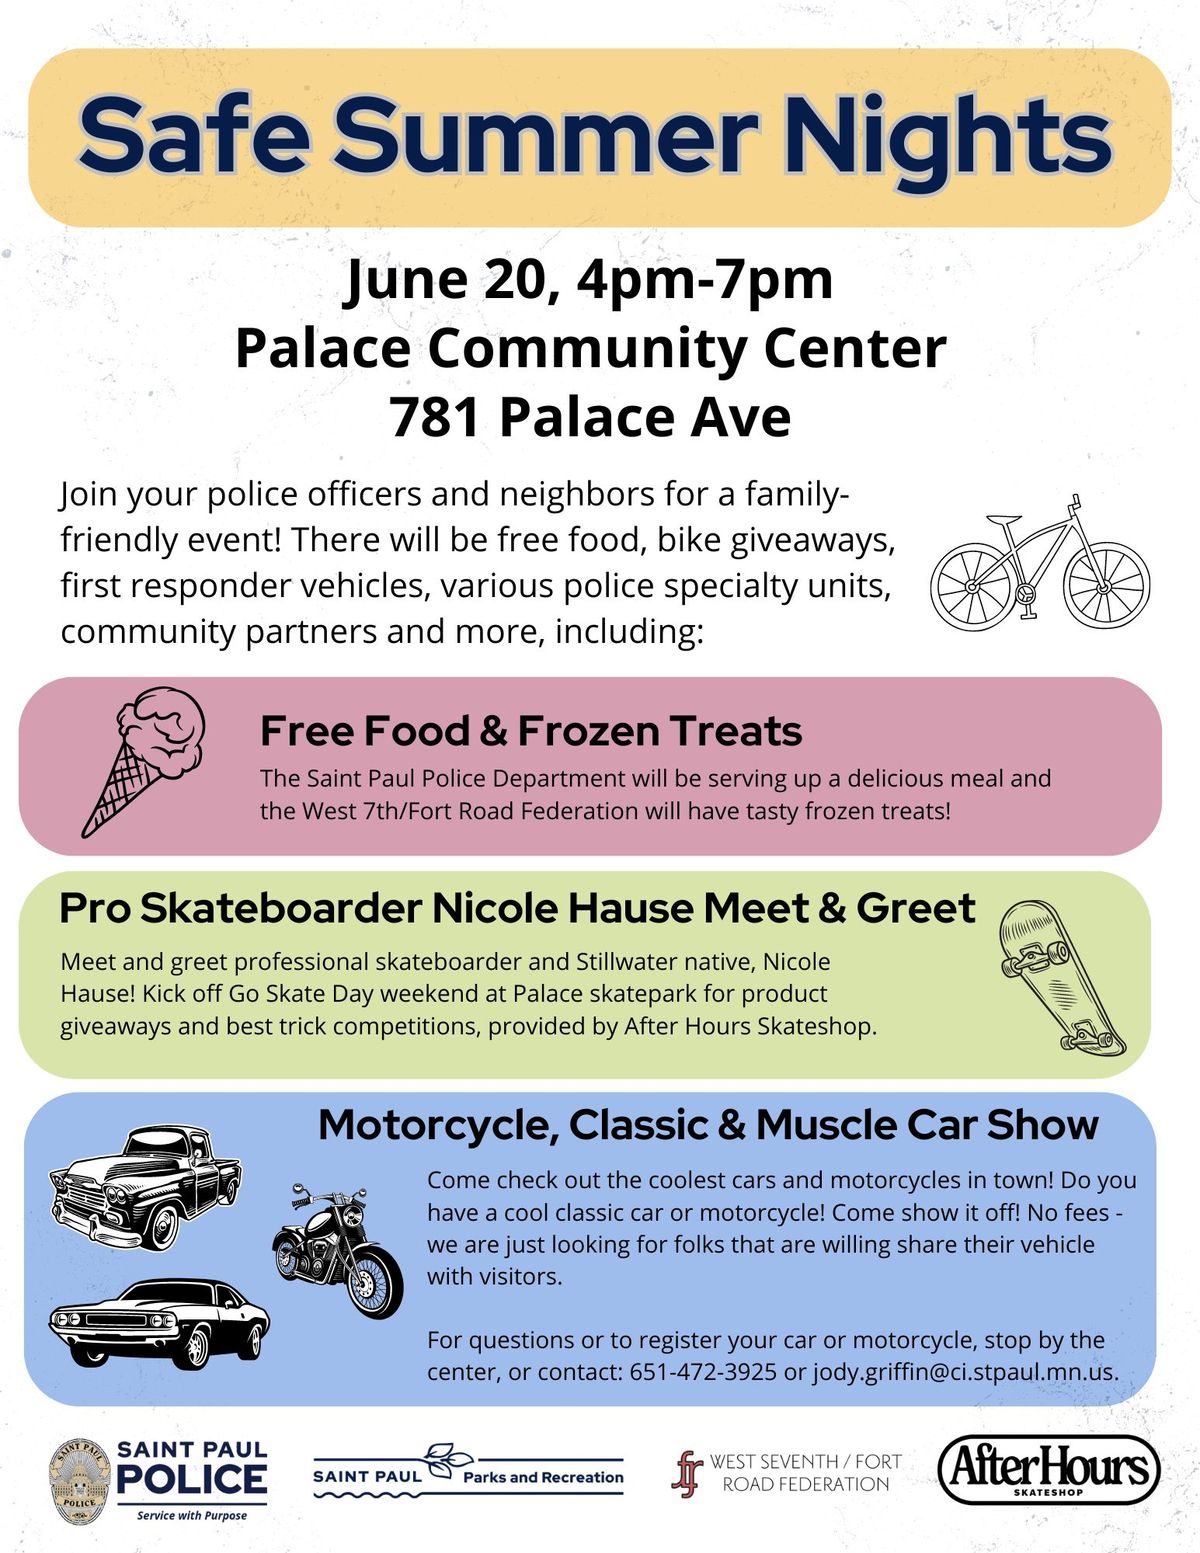 Safe Summer Nights & Motorcycle, Classic & Muscle Car Show (Palace Rec Center)